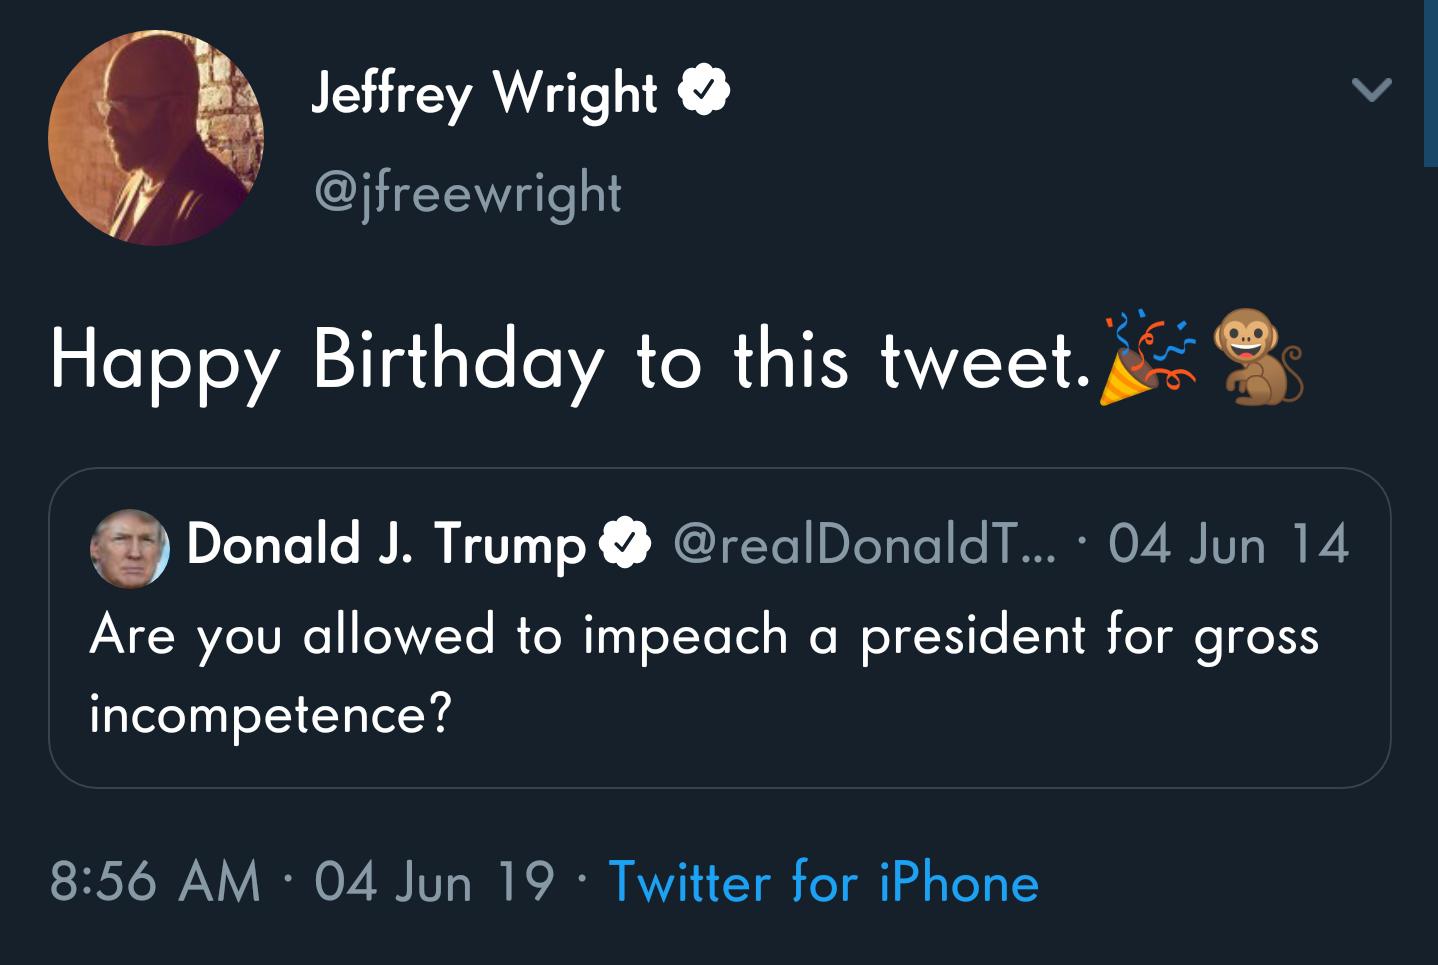 presentation - Jeffrey Wright Happy Birthday to this tweet. 29 Donald J. Trump ... 04 Jun 14 Are you allowed to impeach a president for gross incompetence? 04 Jun 19 Twitter for iPhone